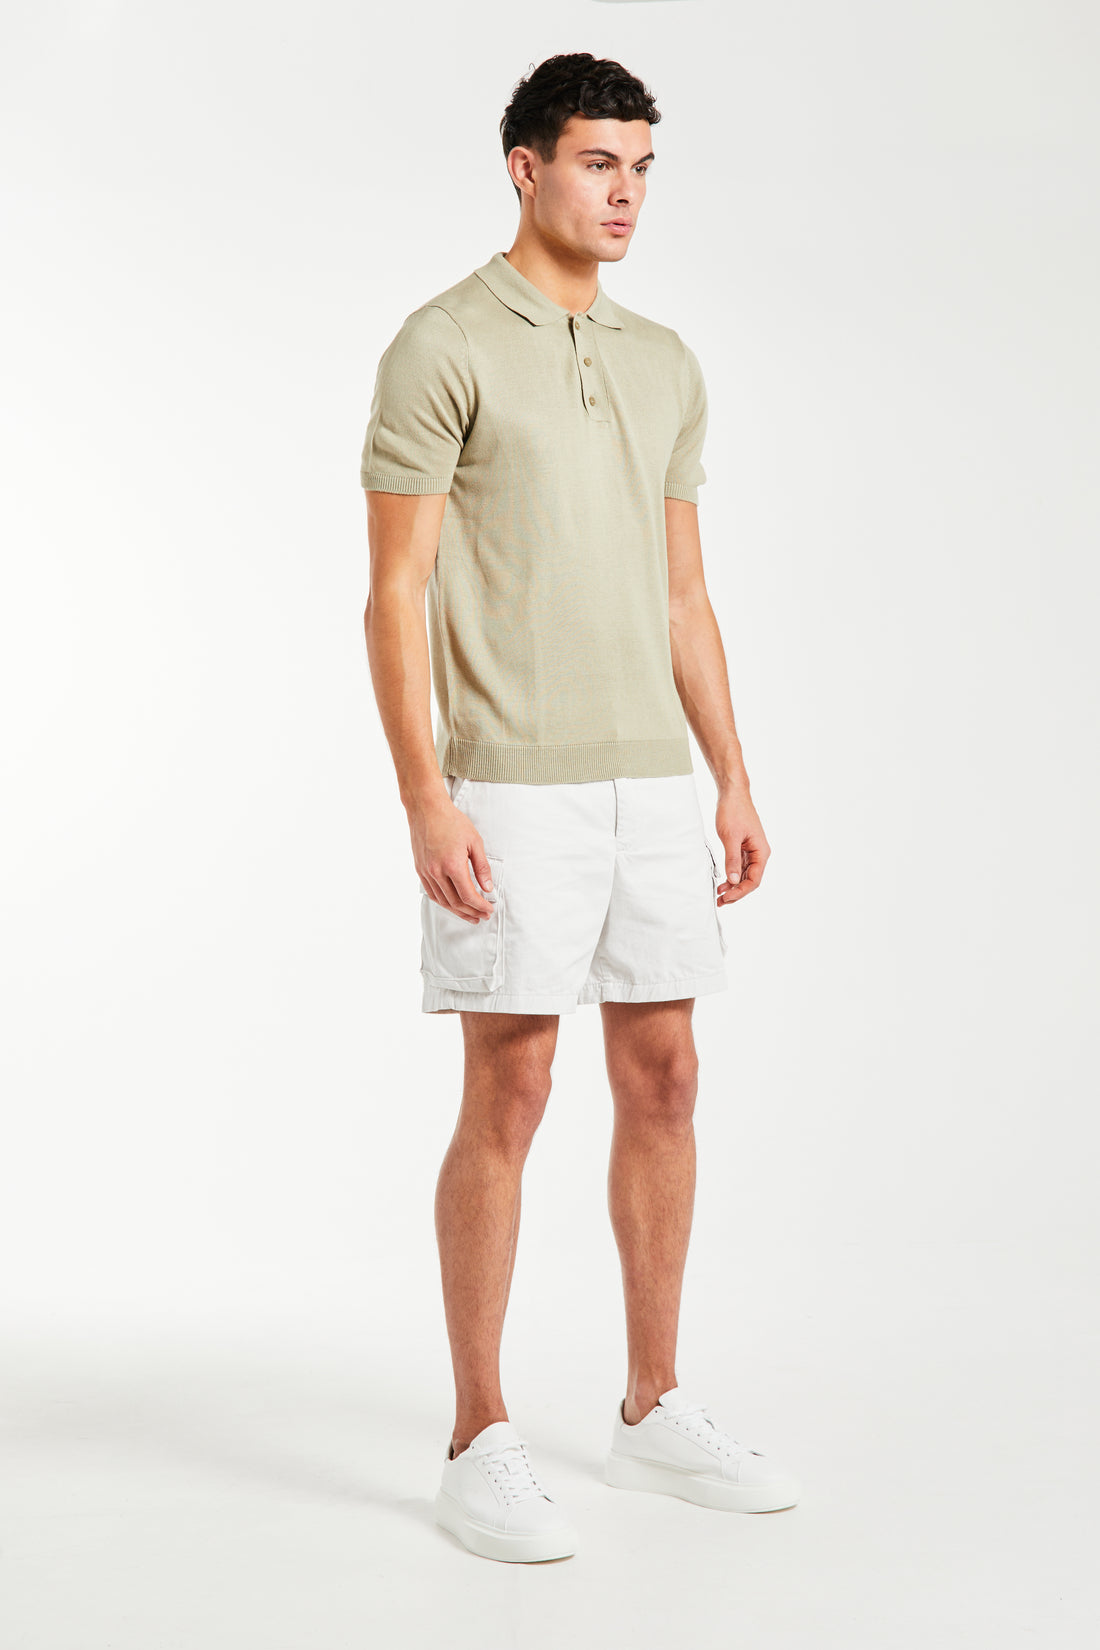 Oatmeal knitted polo on male model styled with shorts